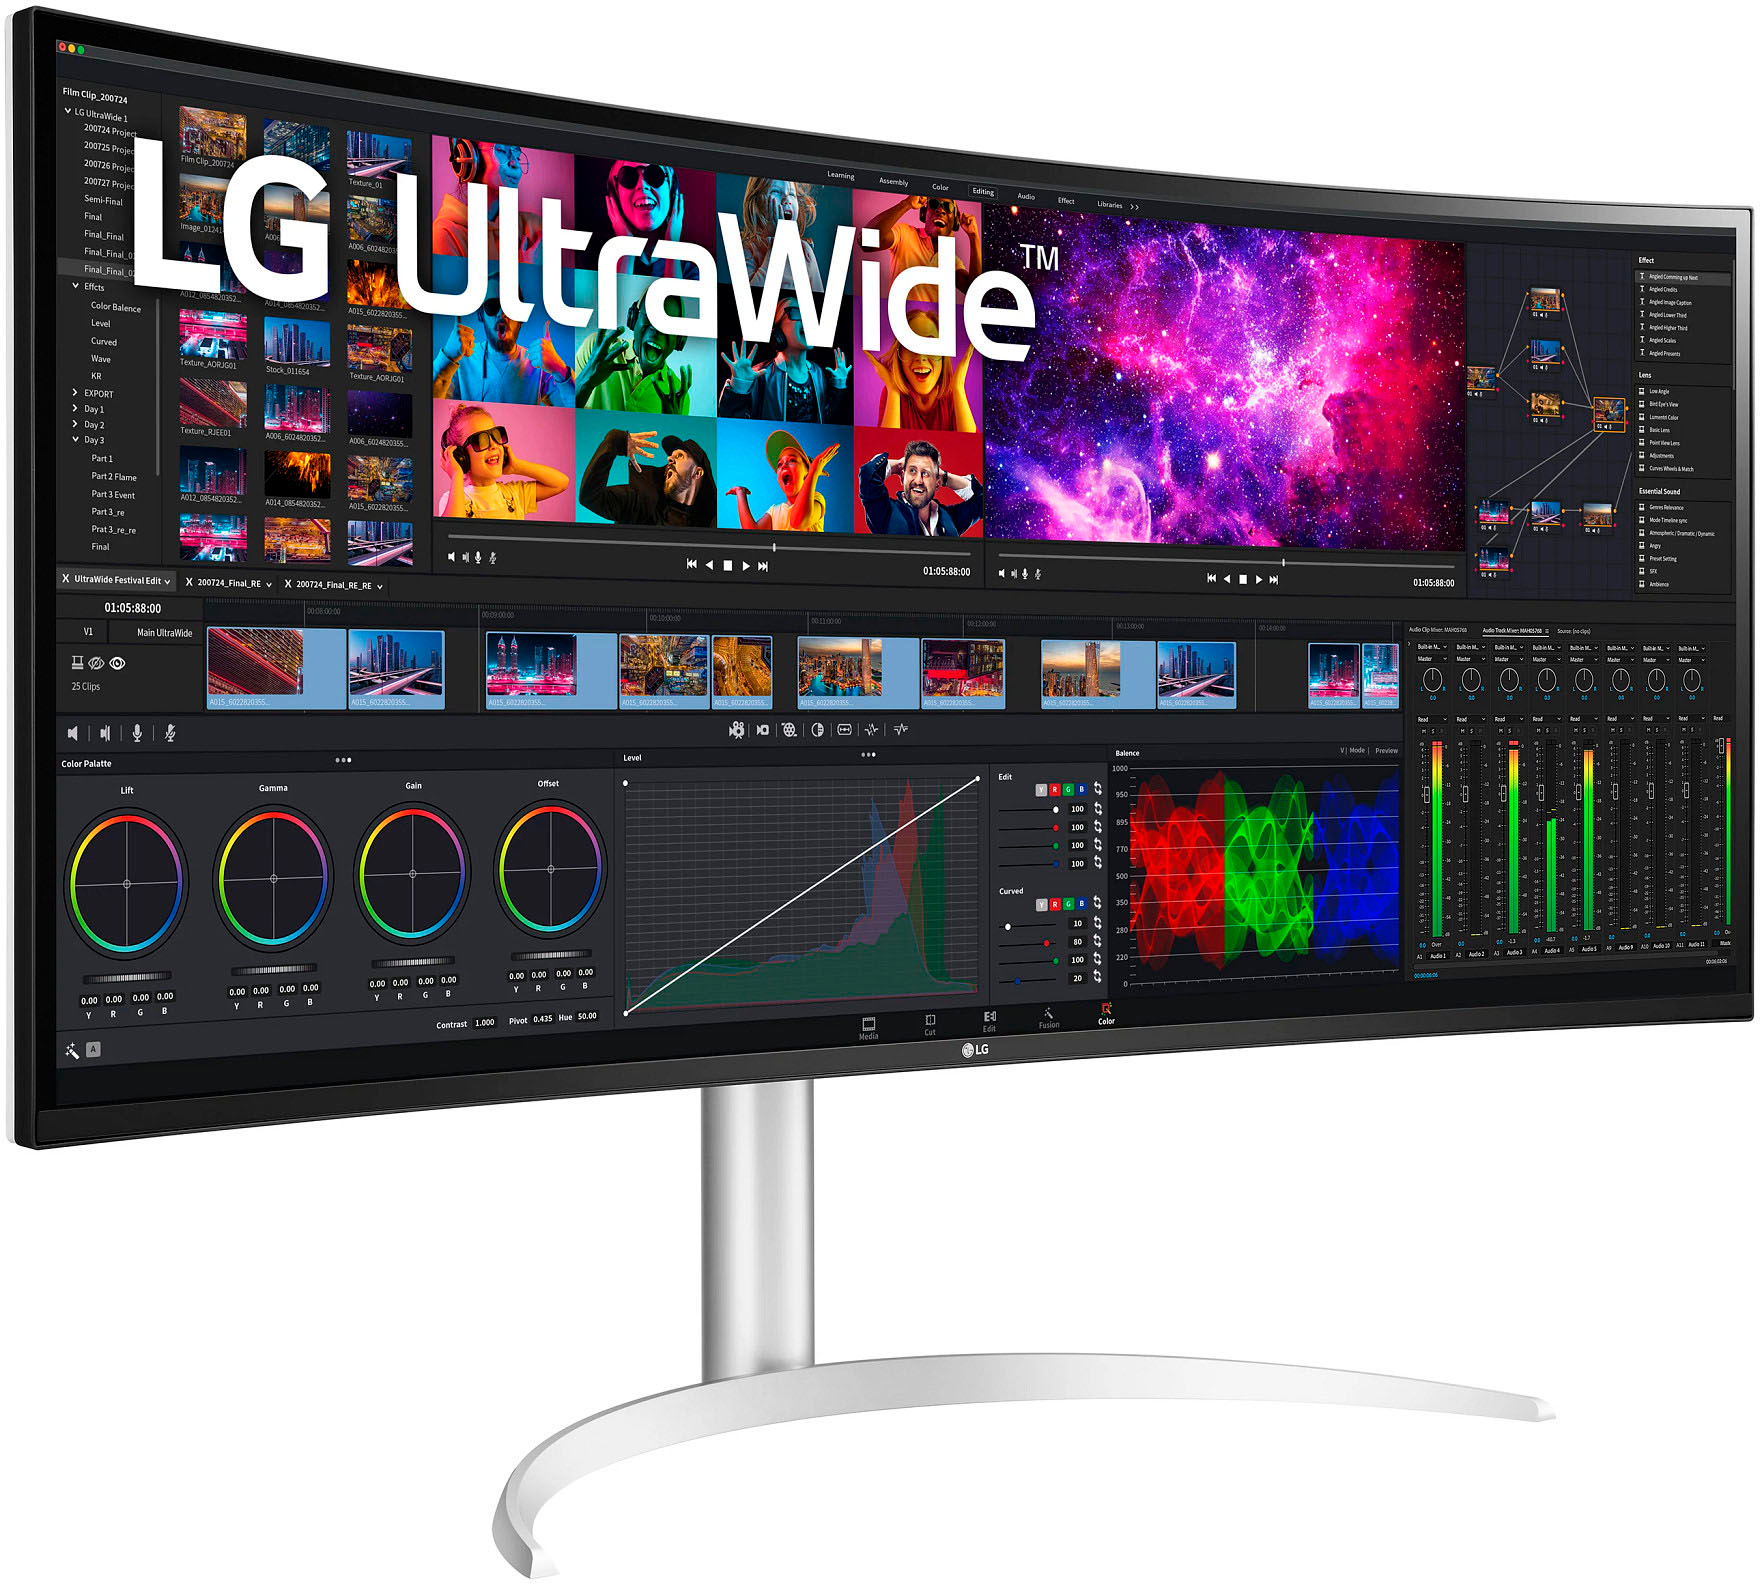 LG 40” IPS LED Curved UltraWide WHUD 71Hz Monitor with HDR (HDMI 